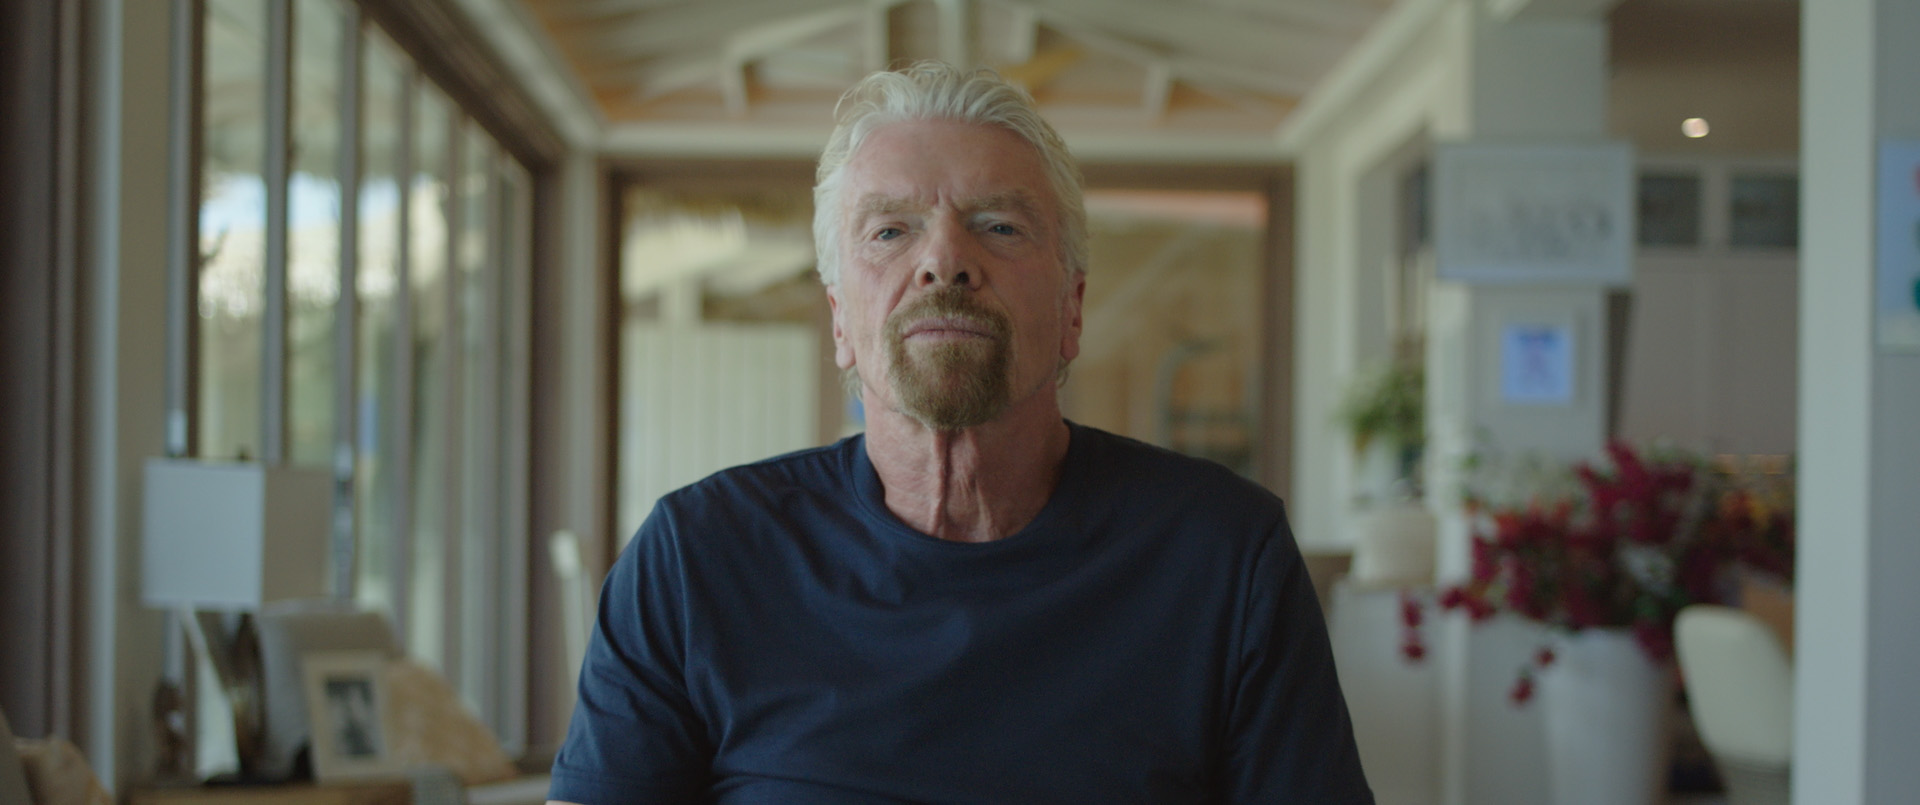 Richard Branson's life and work chronicled in new HBO series - ABC News